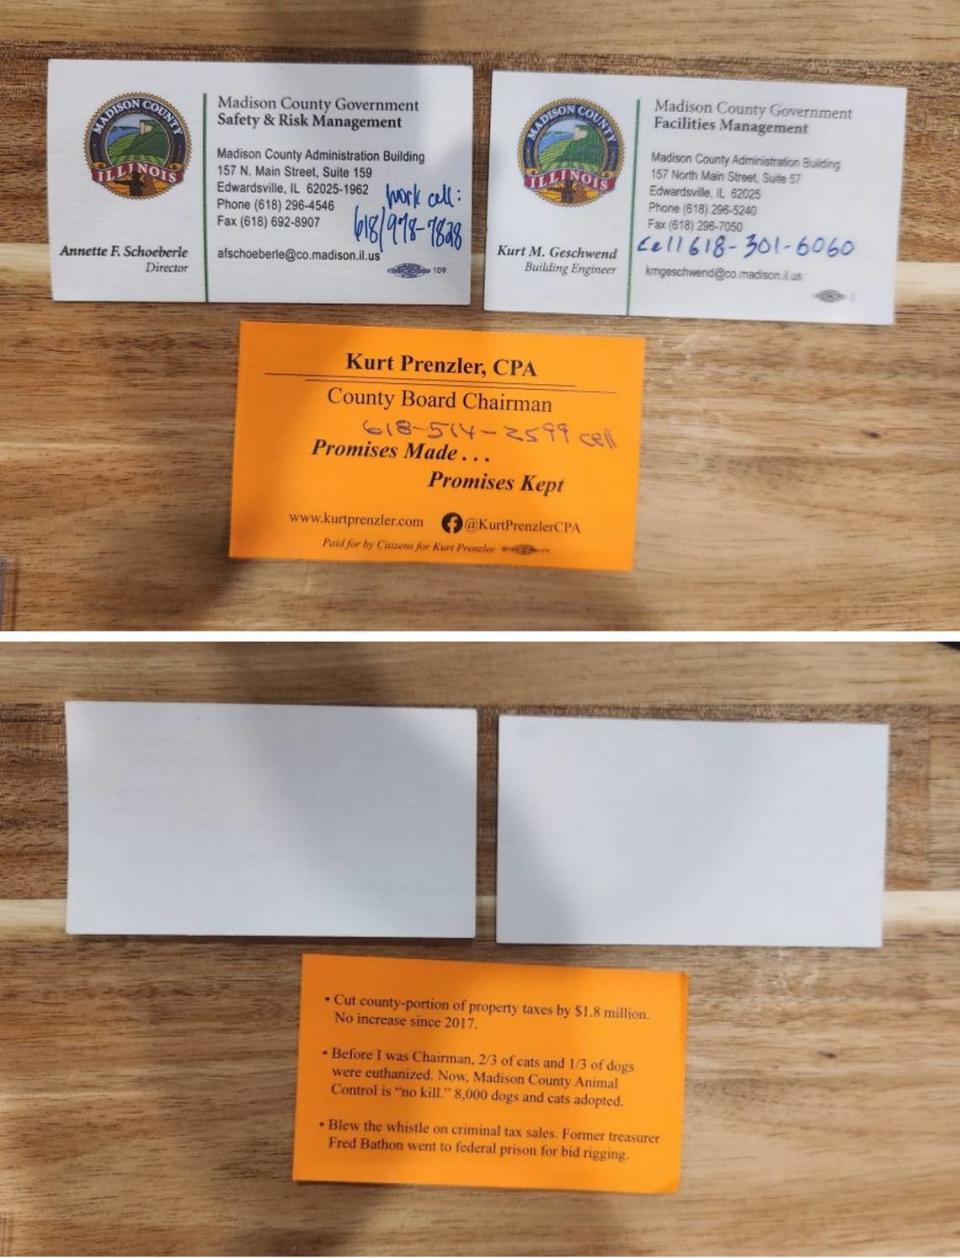 Madison County Board Chairman Kurt Prenzler’s “campaign-style” business cards, as described by the county’s ethic’s adviser, are shown next to examples of official county business cards.